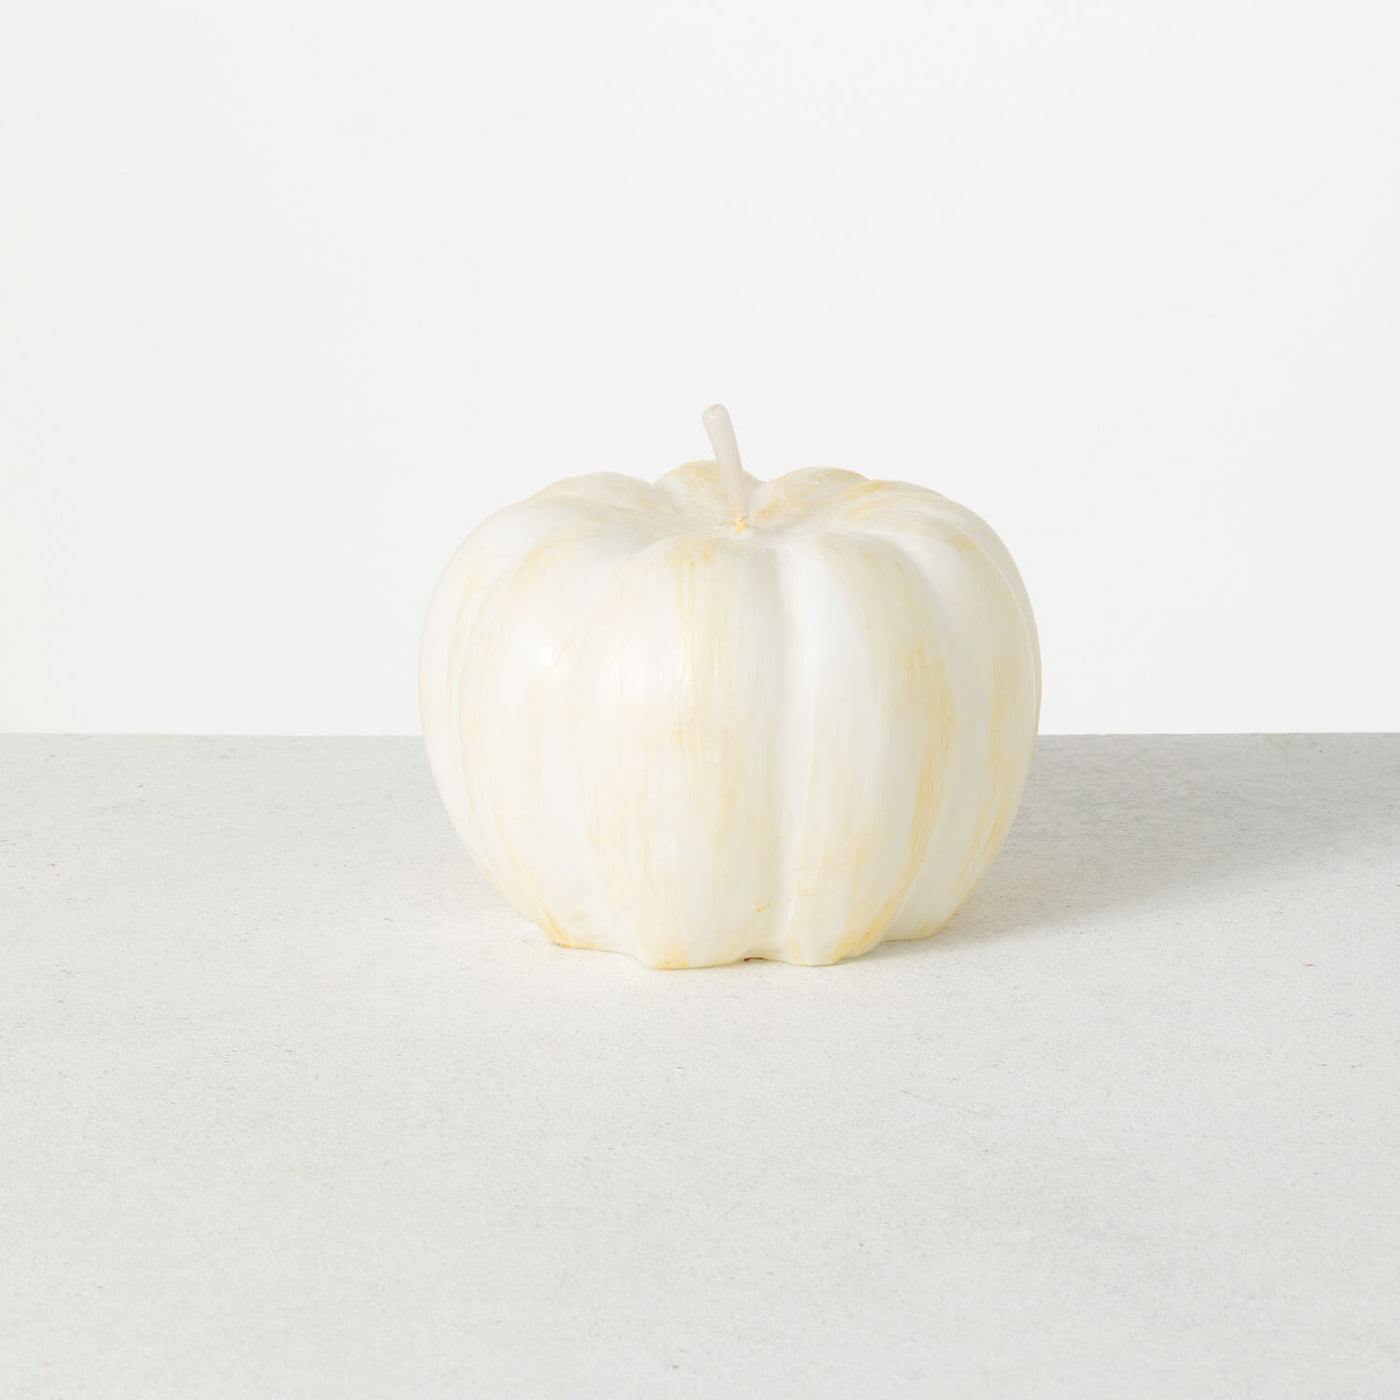 6 inch Vance Kitira white pumpkin candle with brushed gold accents